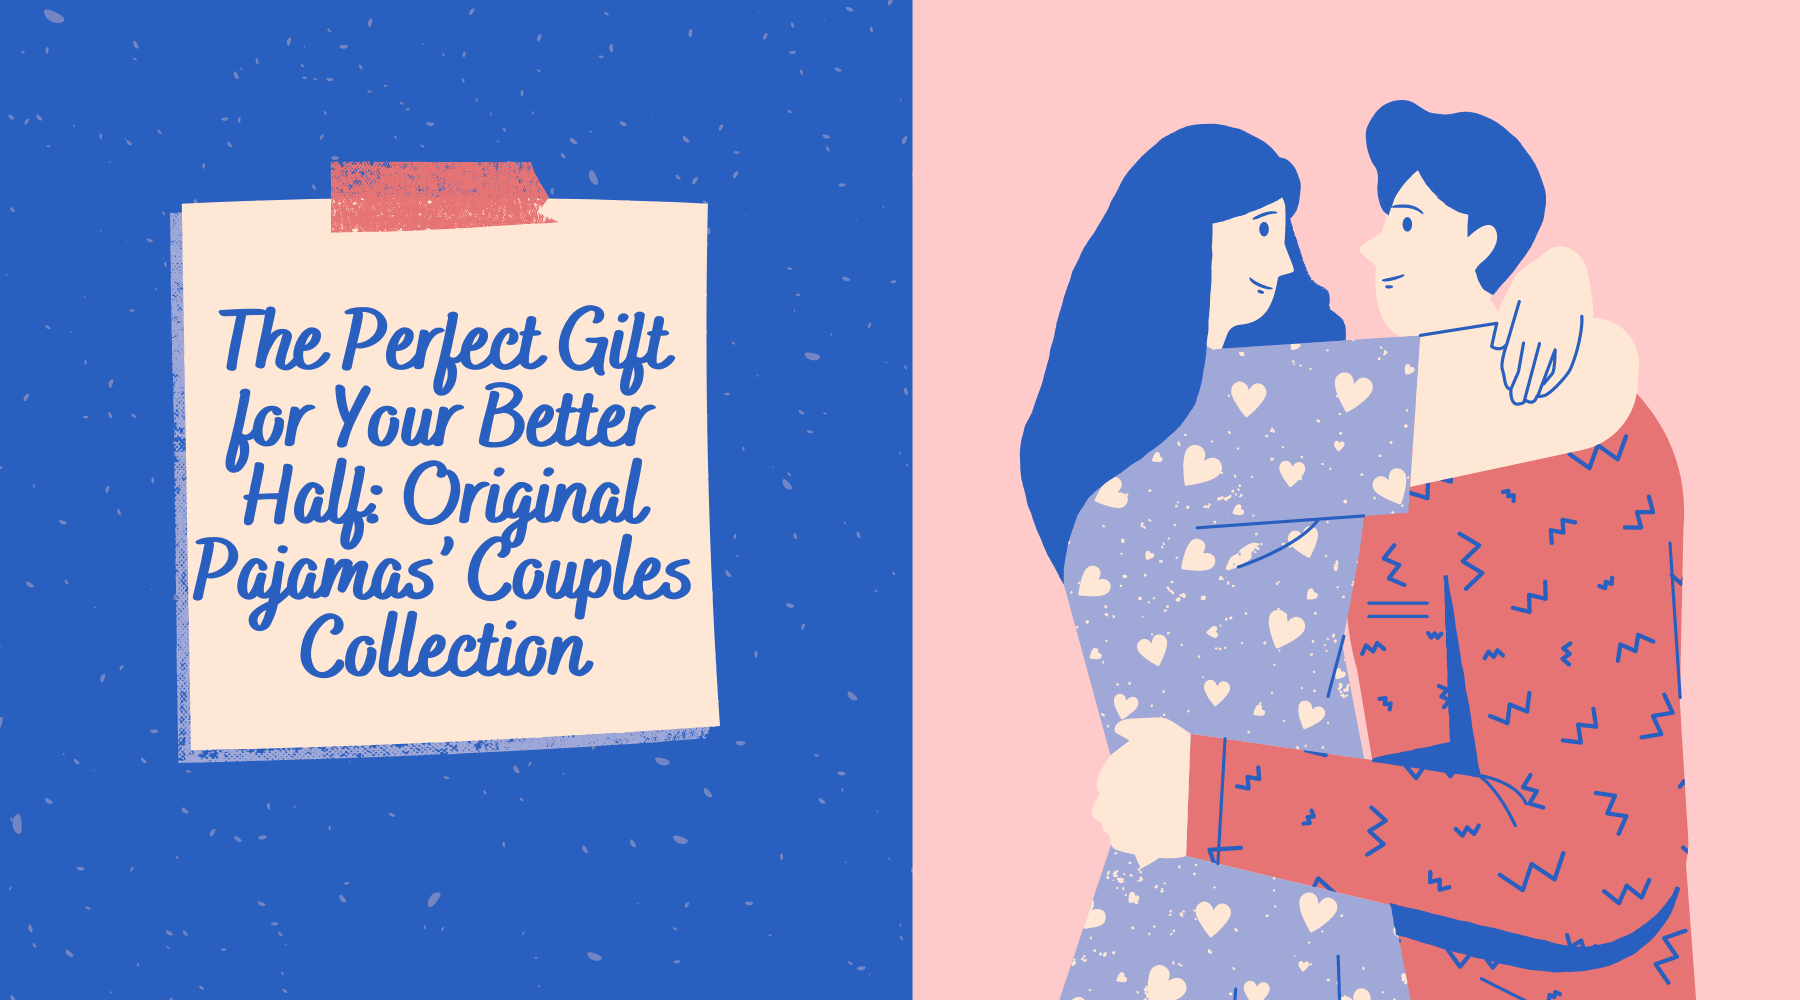 The Perfect Gift for Your Better Half: Original Pajamas’ Couples Collection